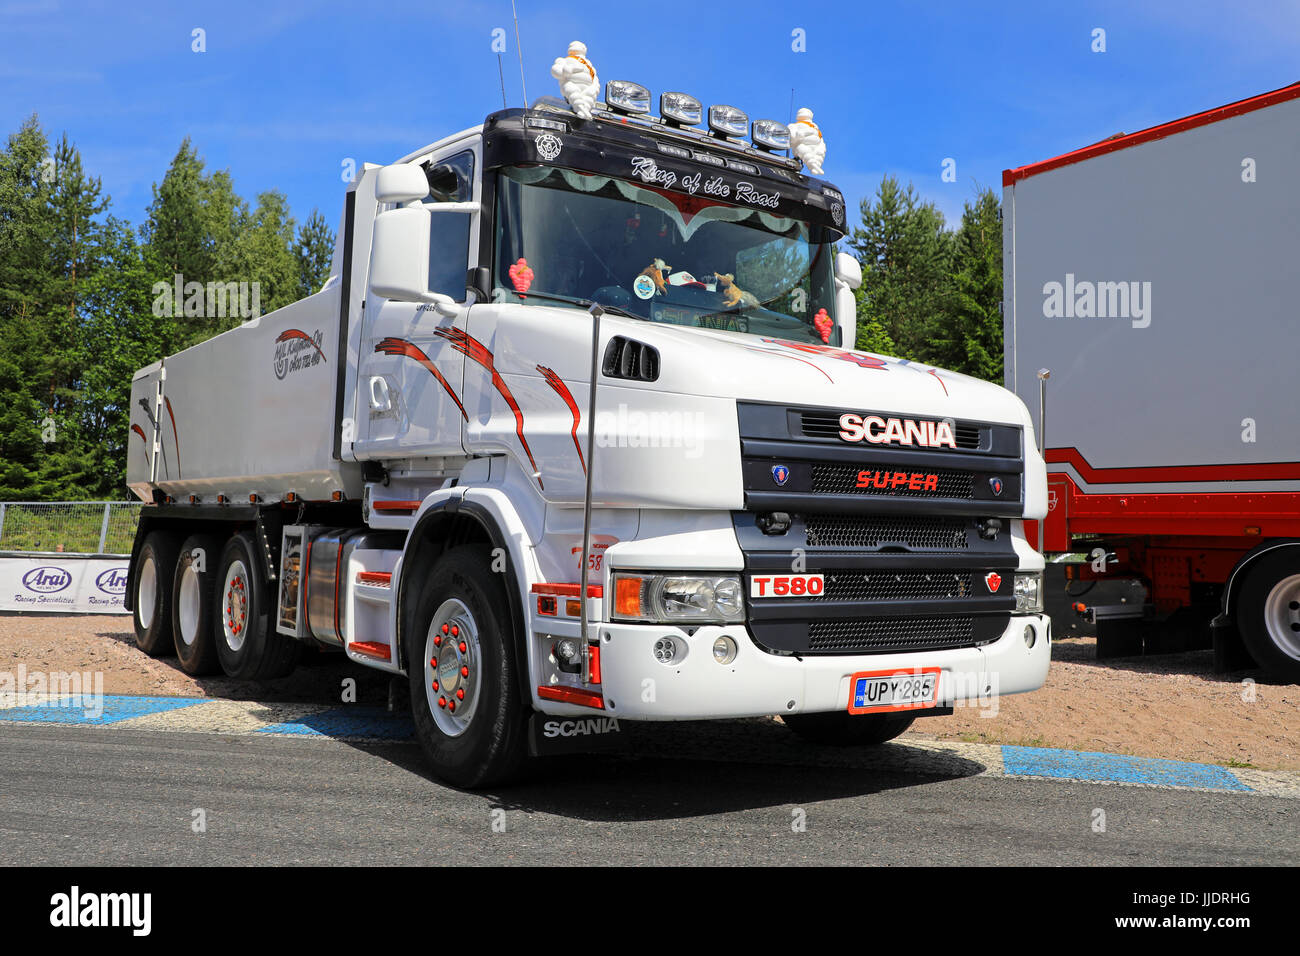 HAMEENLINNA, FINLAND - JULY 15, 2017: White and red Super Scania T580 tipper truck of MJL Kuljetus Oy on display on Tawastia Truck Weekend 2017. Stock Photo